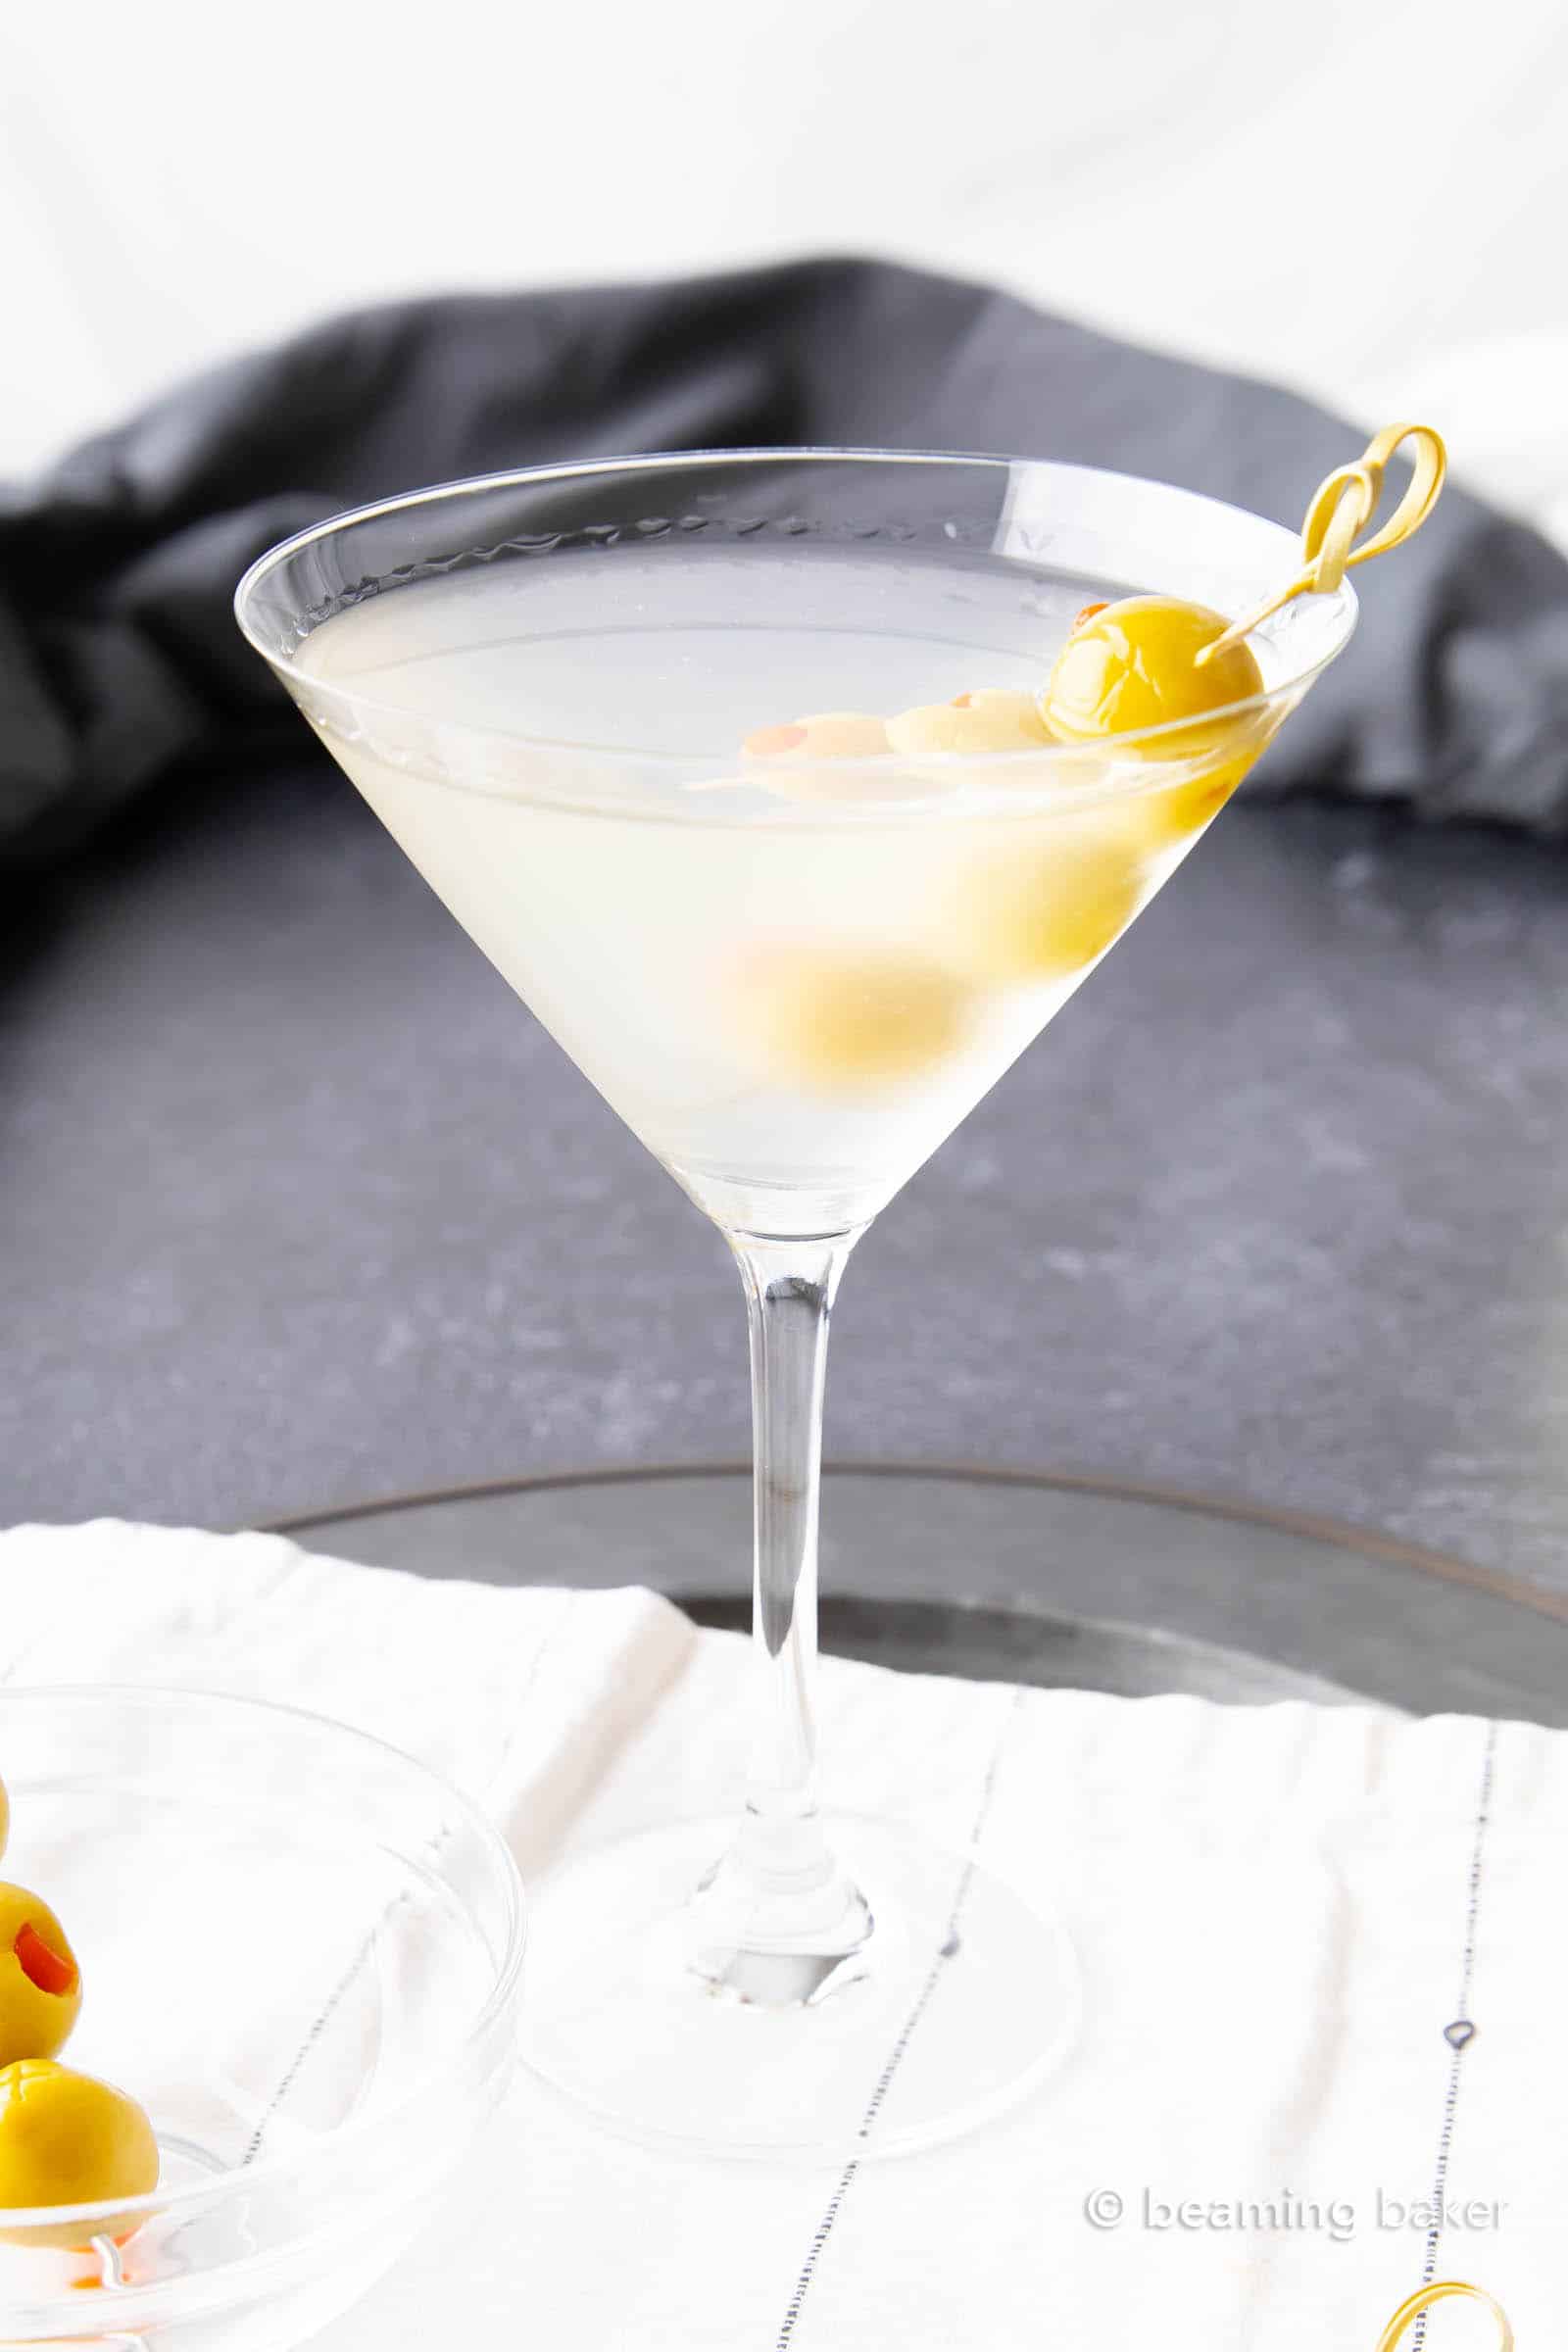 A large martini glass filled with dirty martini cocktail on a white napkin